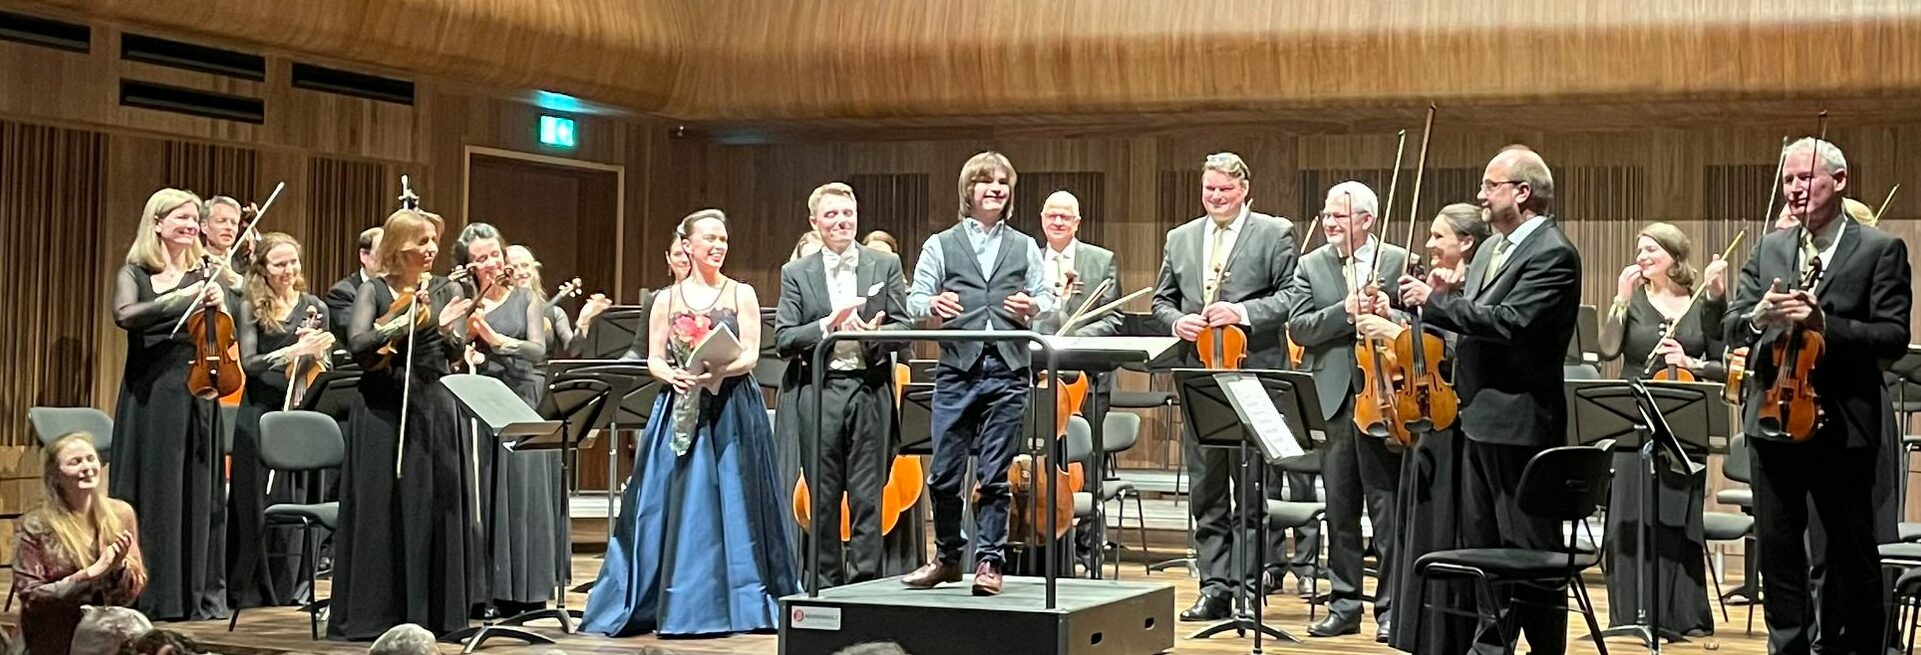 Ethan Stein on a podium surrounded by an orchestra, all standing